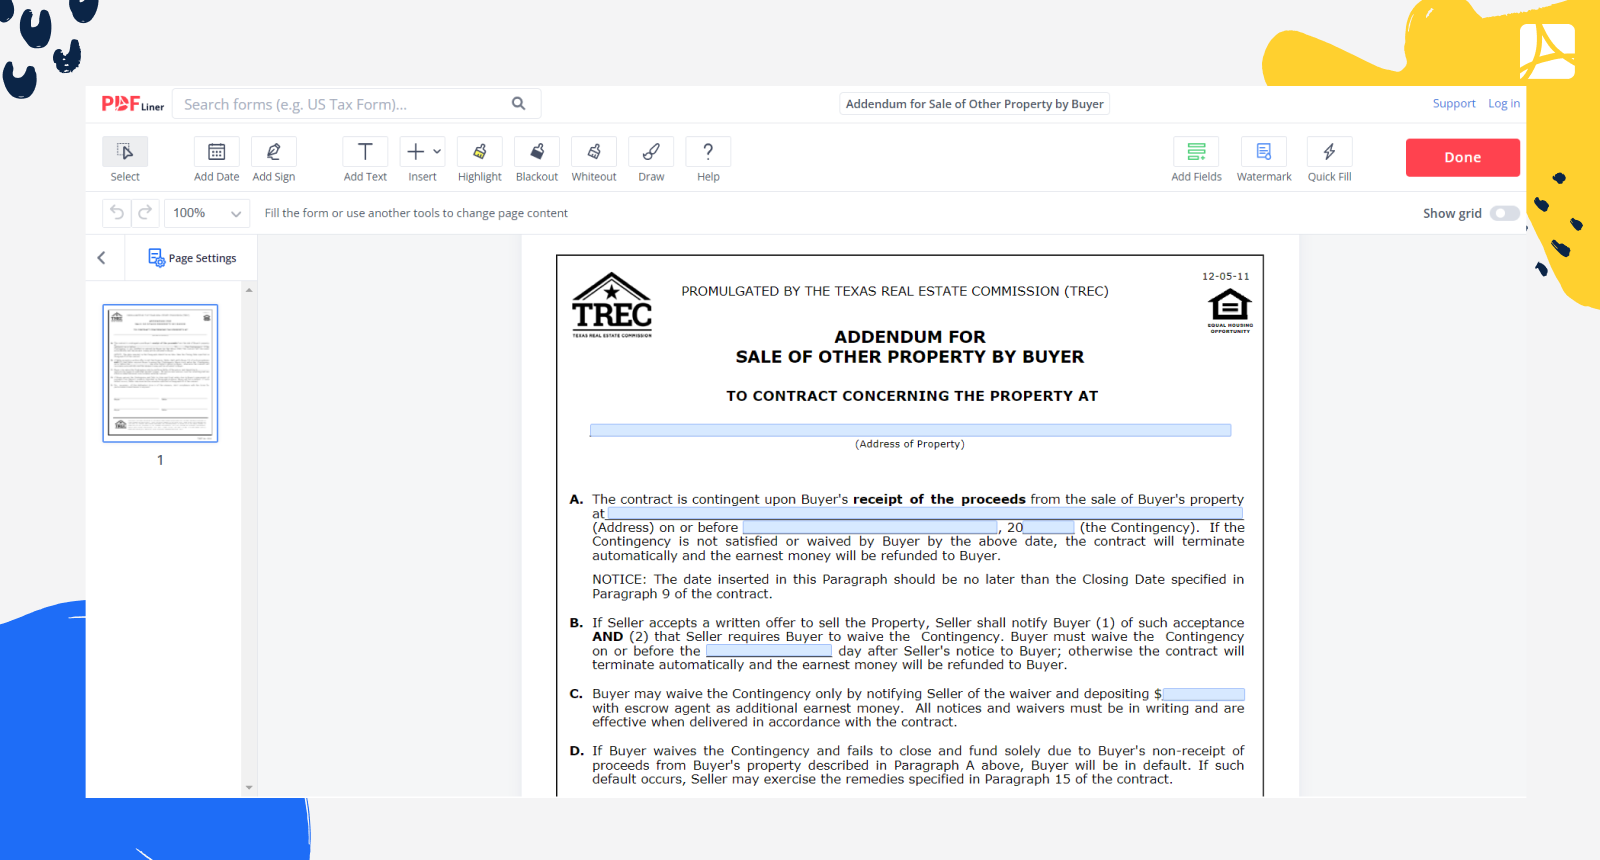 Addendum for Sale of Other Property by Buyer Form Screenshot